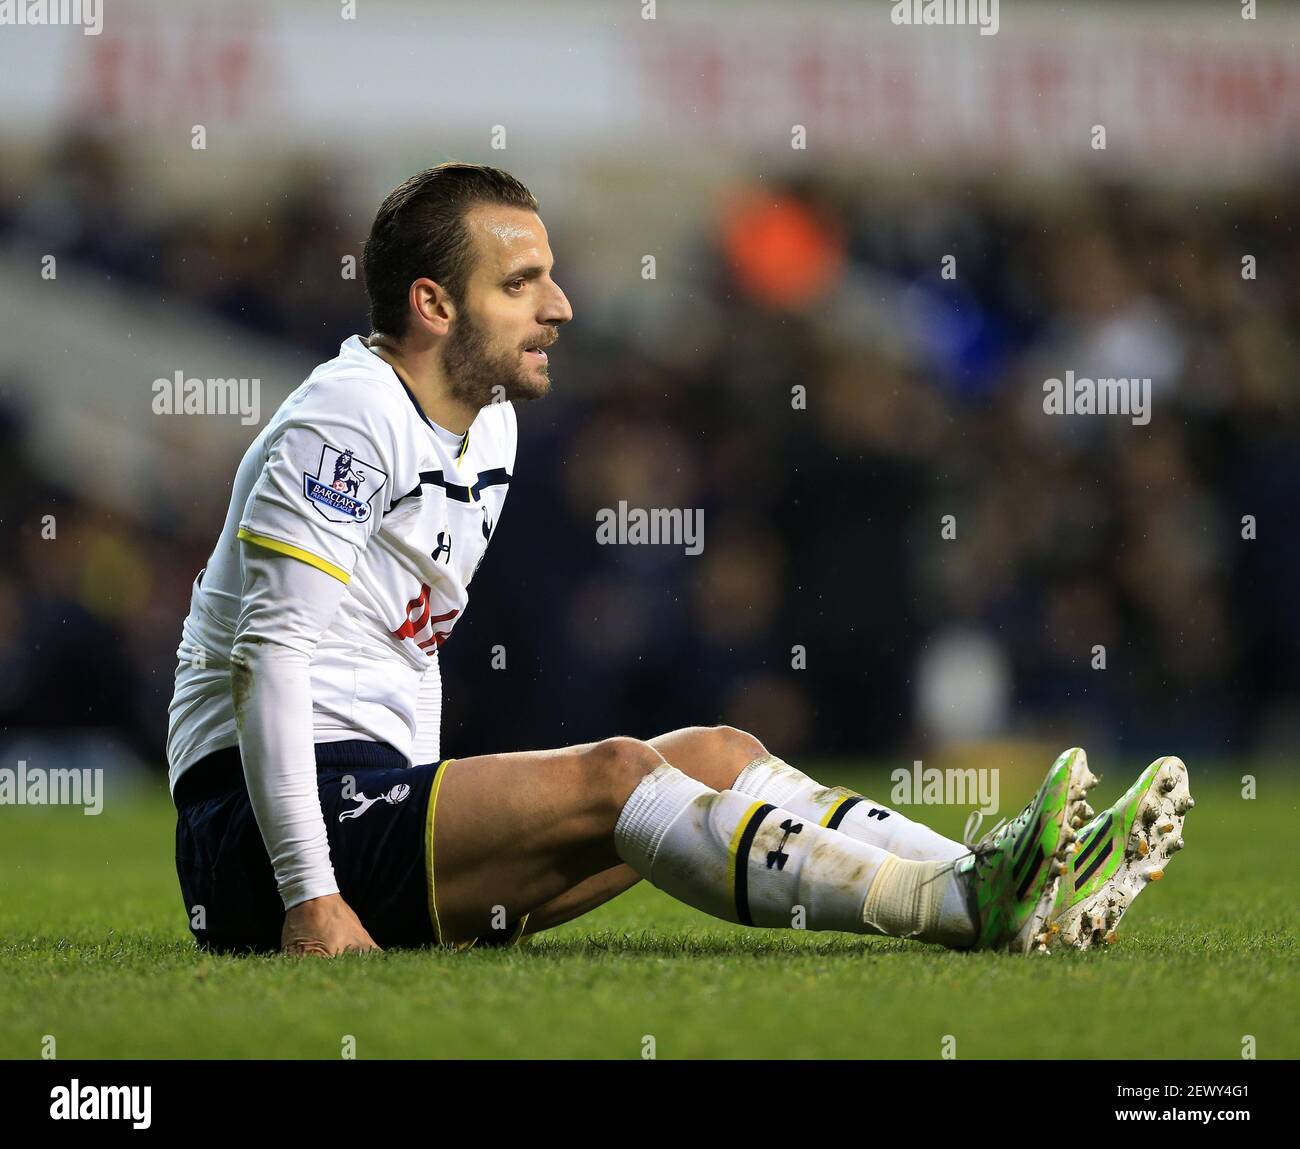 Jan. 14, 2015 - London, United Kingdom - Tottenham's Roberto Soldado looks on dejected ..FA Cup 3rd Round Replay - Tottenham Hotspur vs Burnley - White Hart Lane - England - 14th January 2015 - Picture David Klein/Sportimage/Cal Sport Media. *** Please Use Credit from Credit Field *** Stock Photo